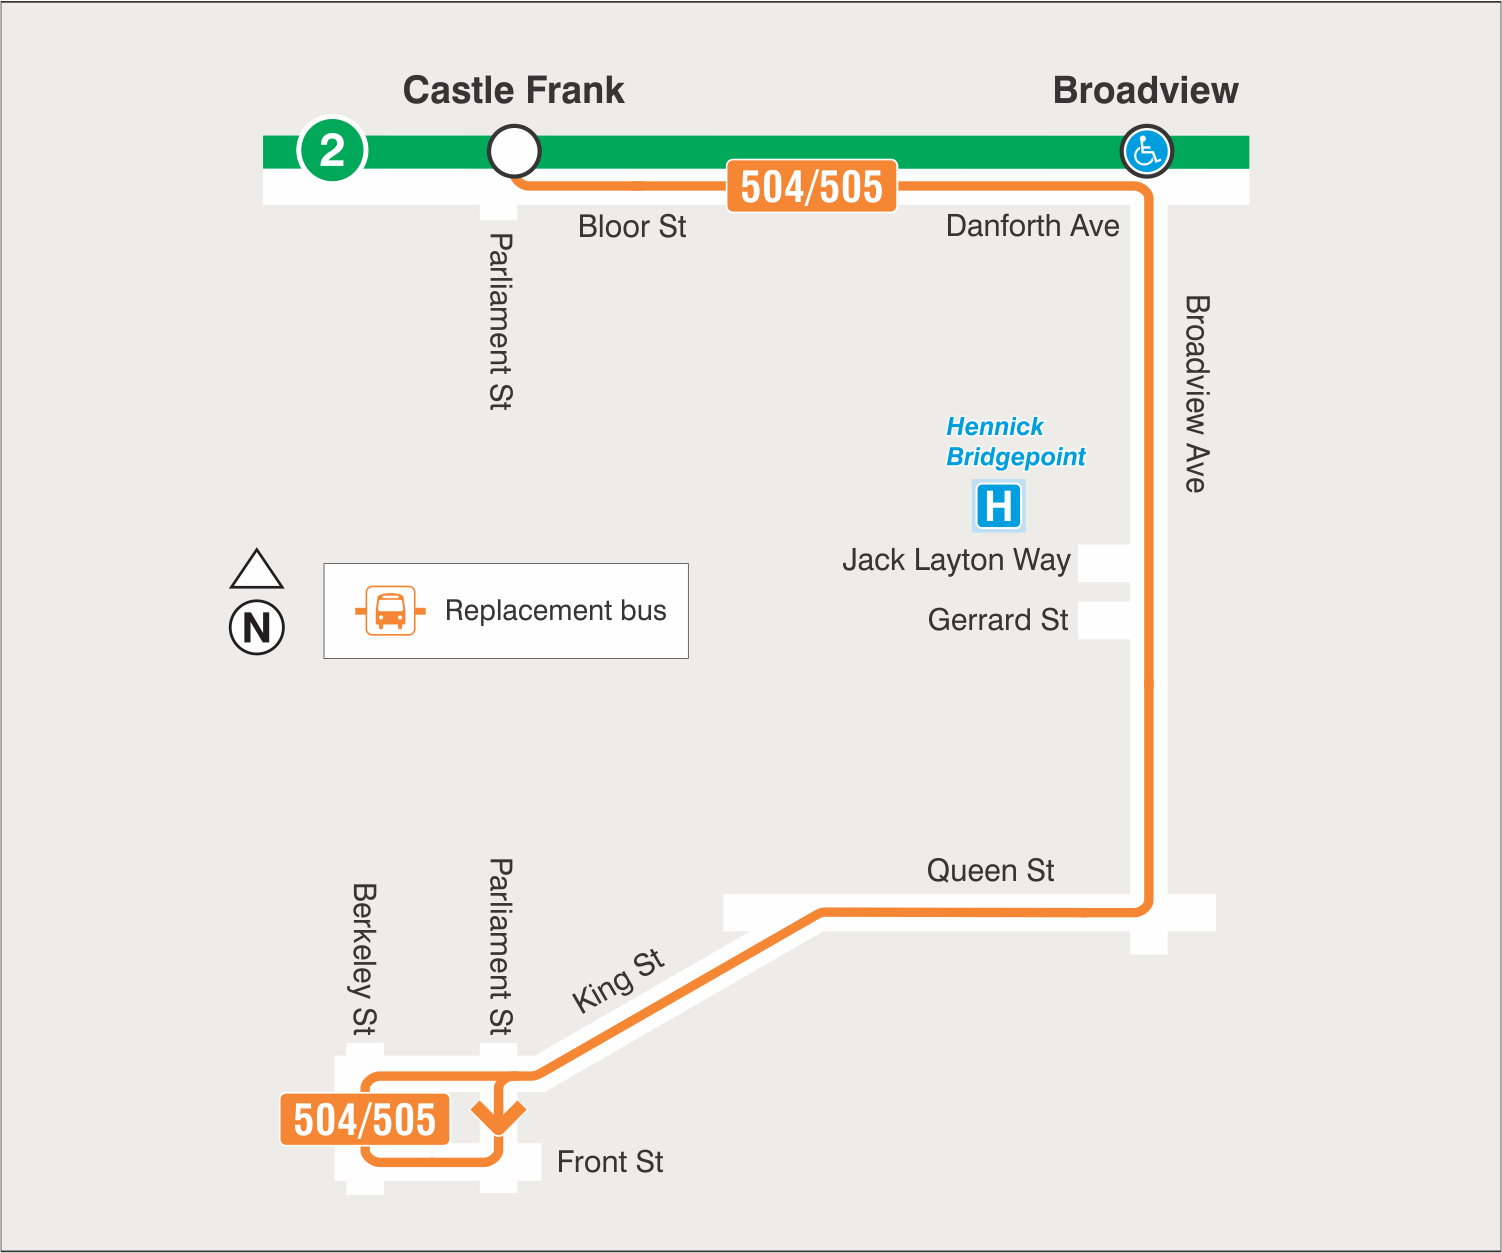 Map of 504-505 Castle Frank for Broadview Station bus service changes